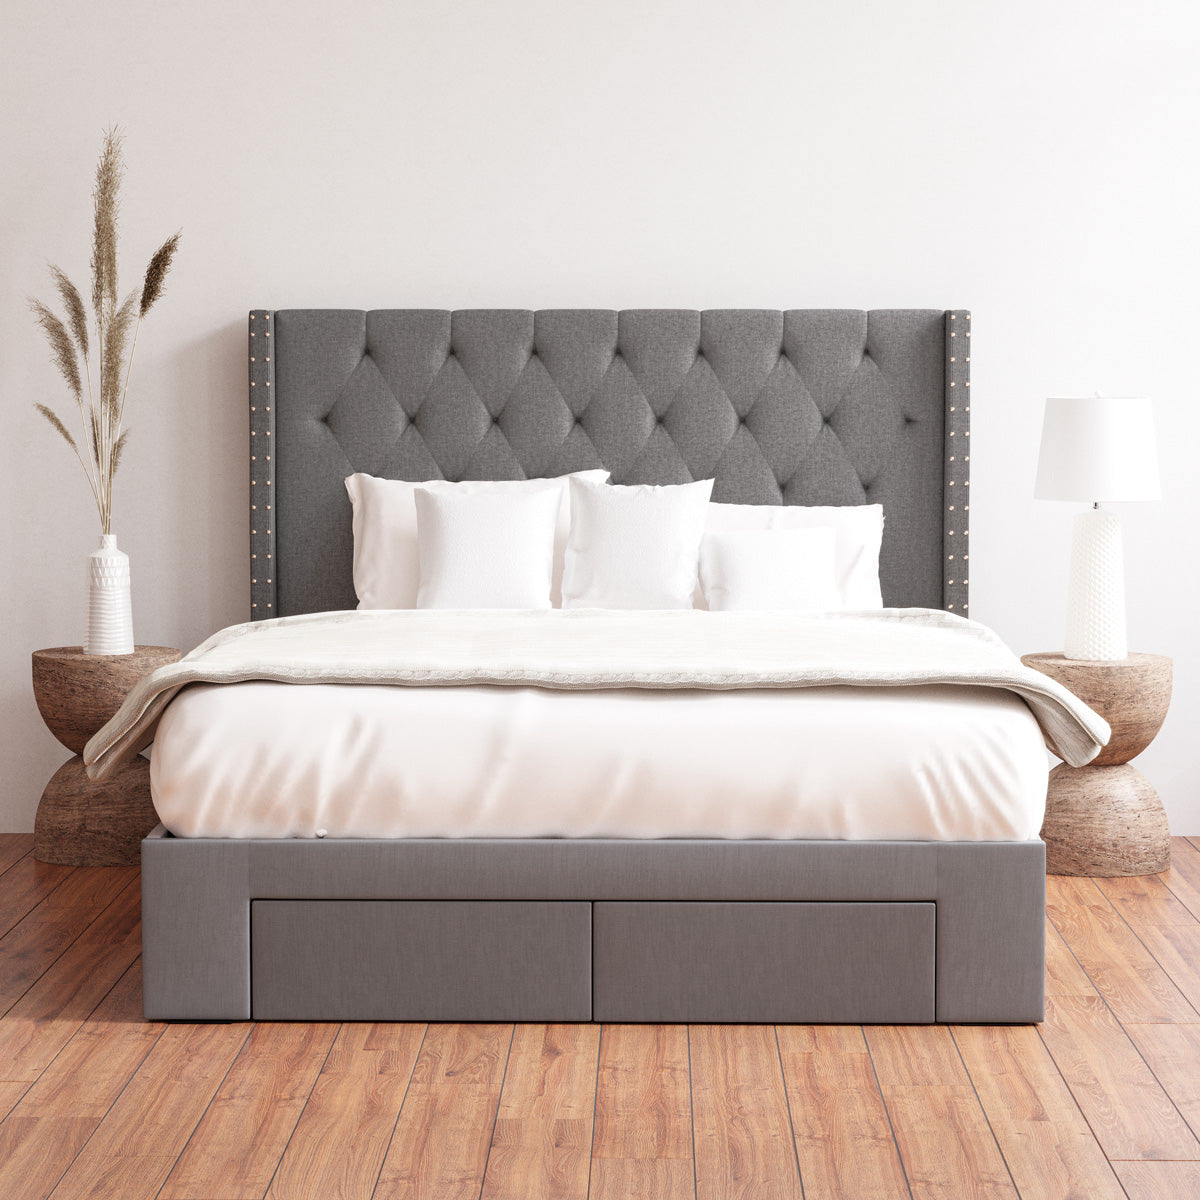 Leonora Wing Bed Frame with Four Storage Drawers (Charcoal Fabric)